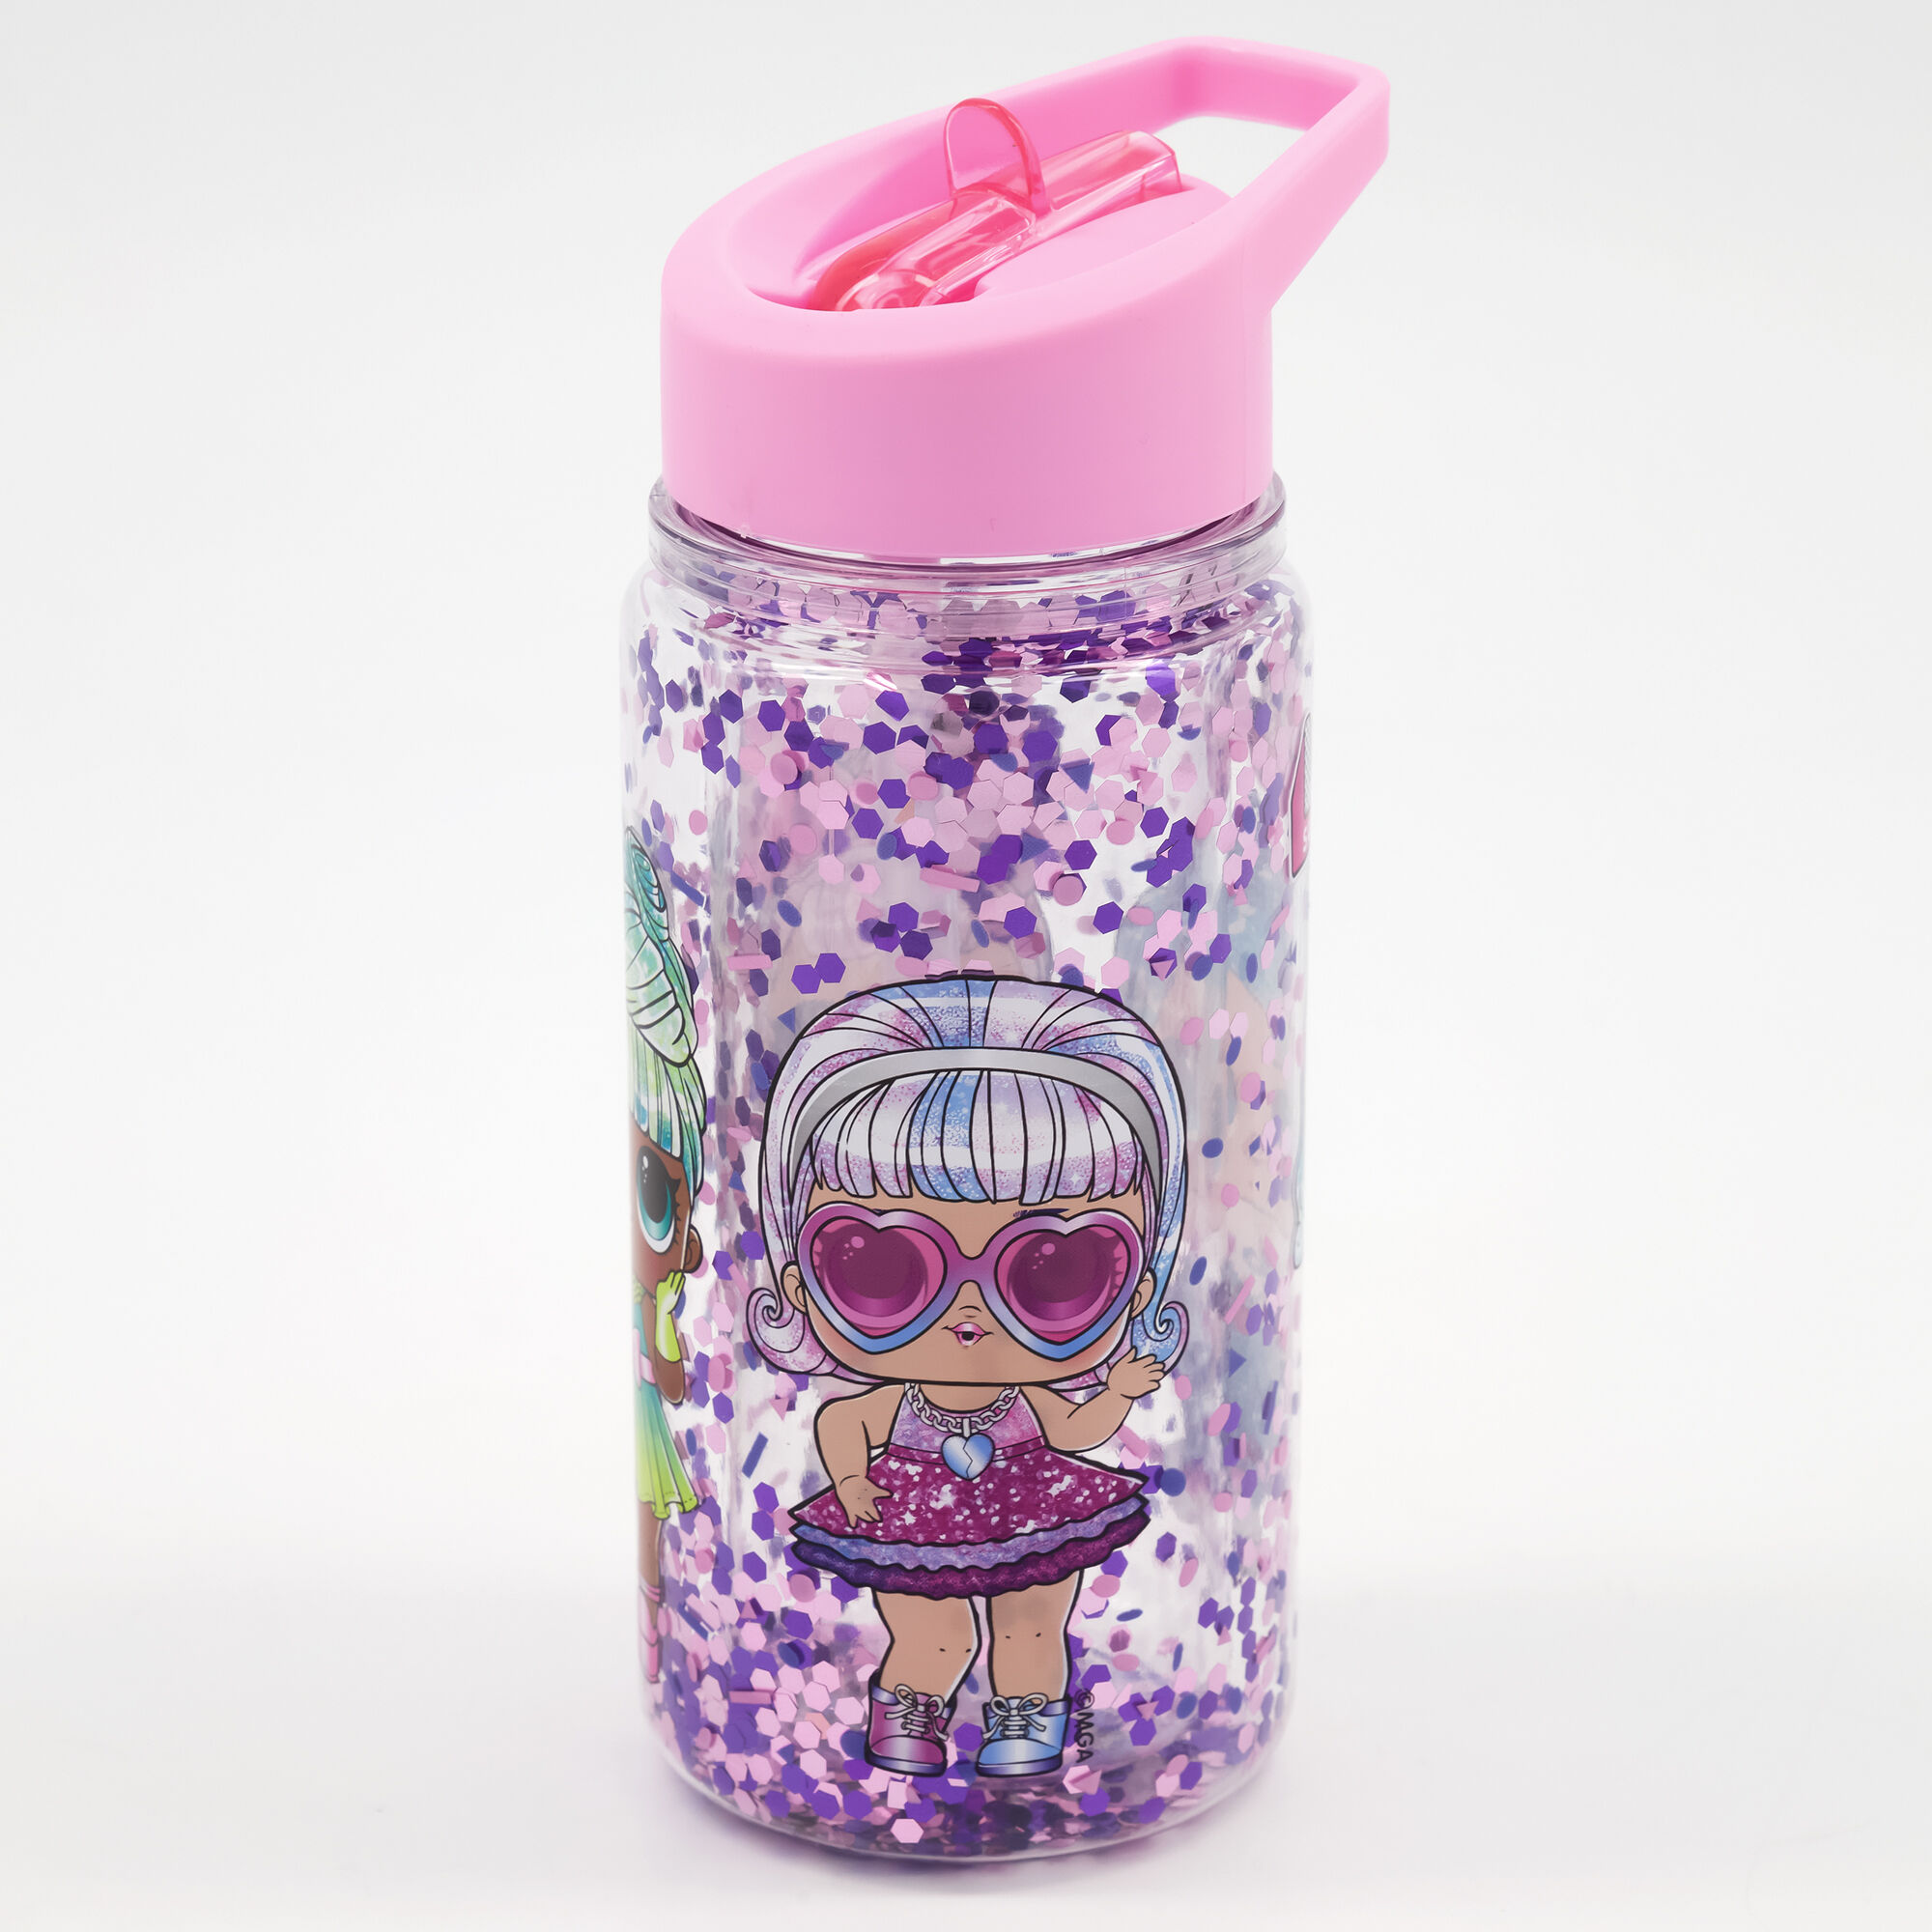 View Claires Lol Surprise Glitter Water Bottle Pink information